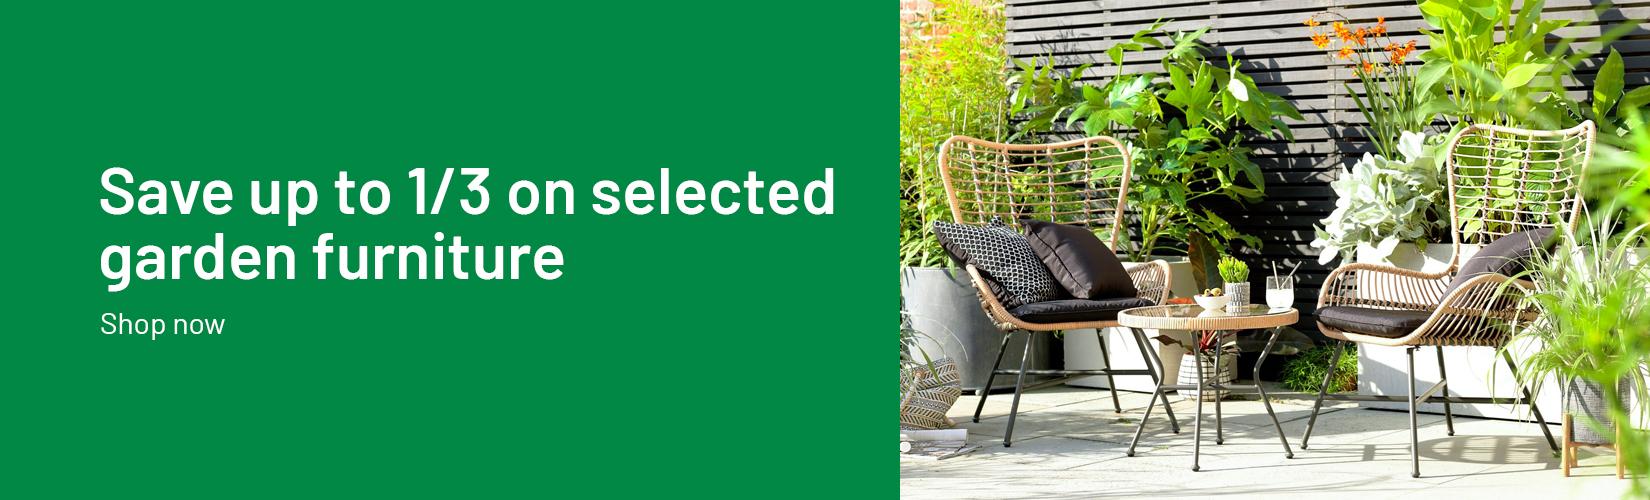 Save up to 1/3 on selected garden furniture.